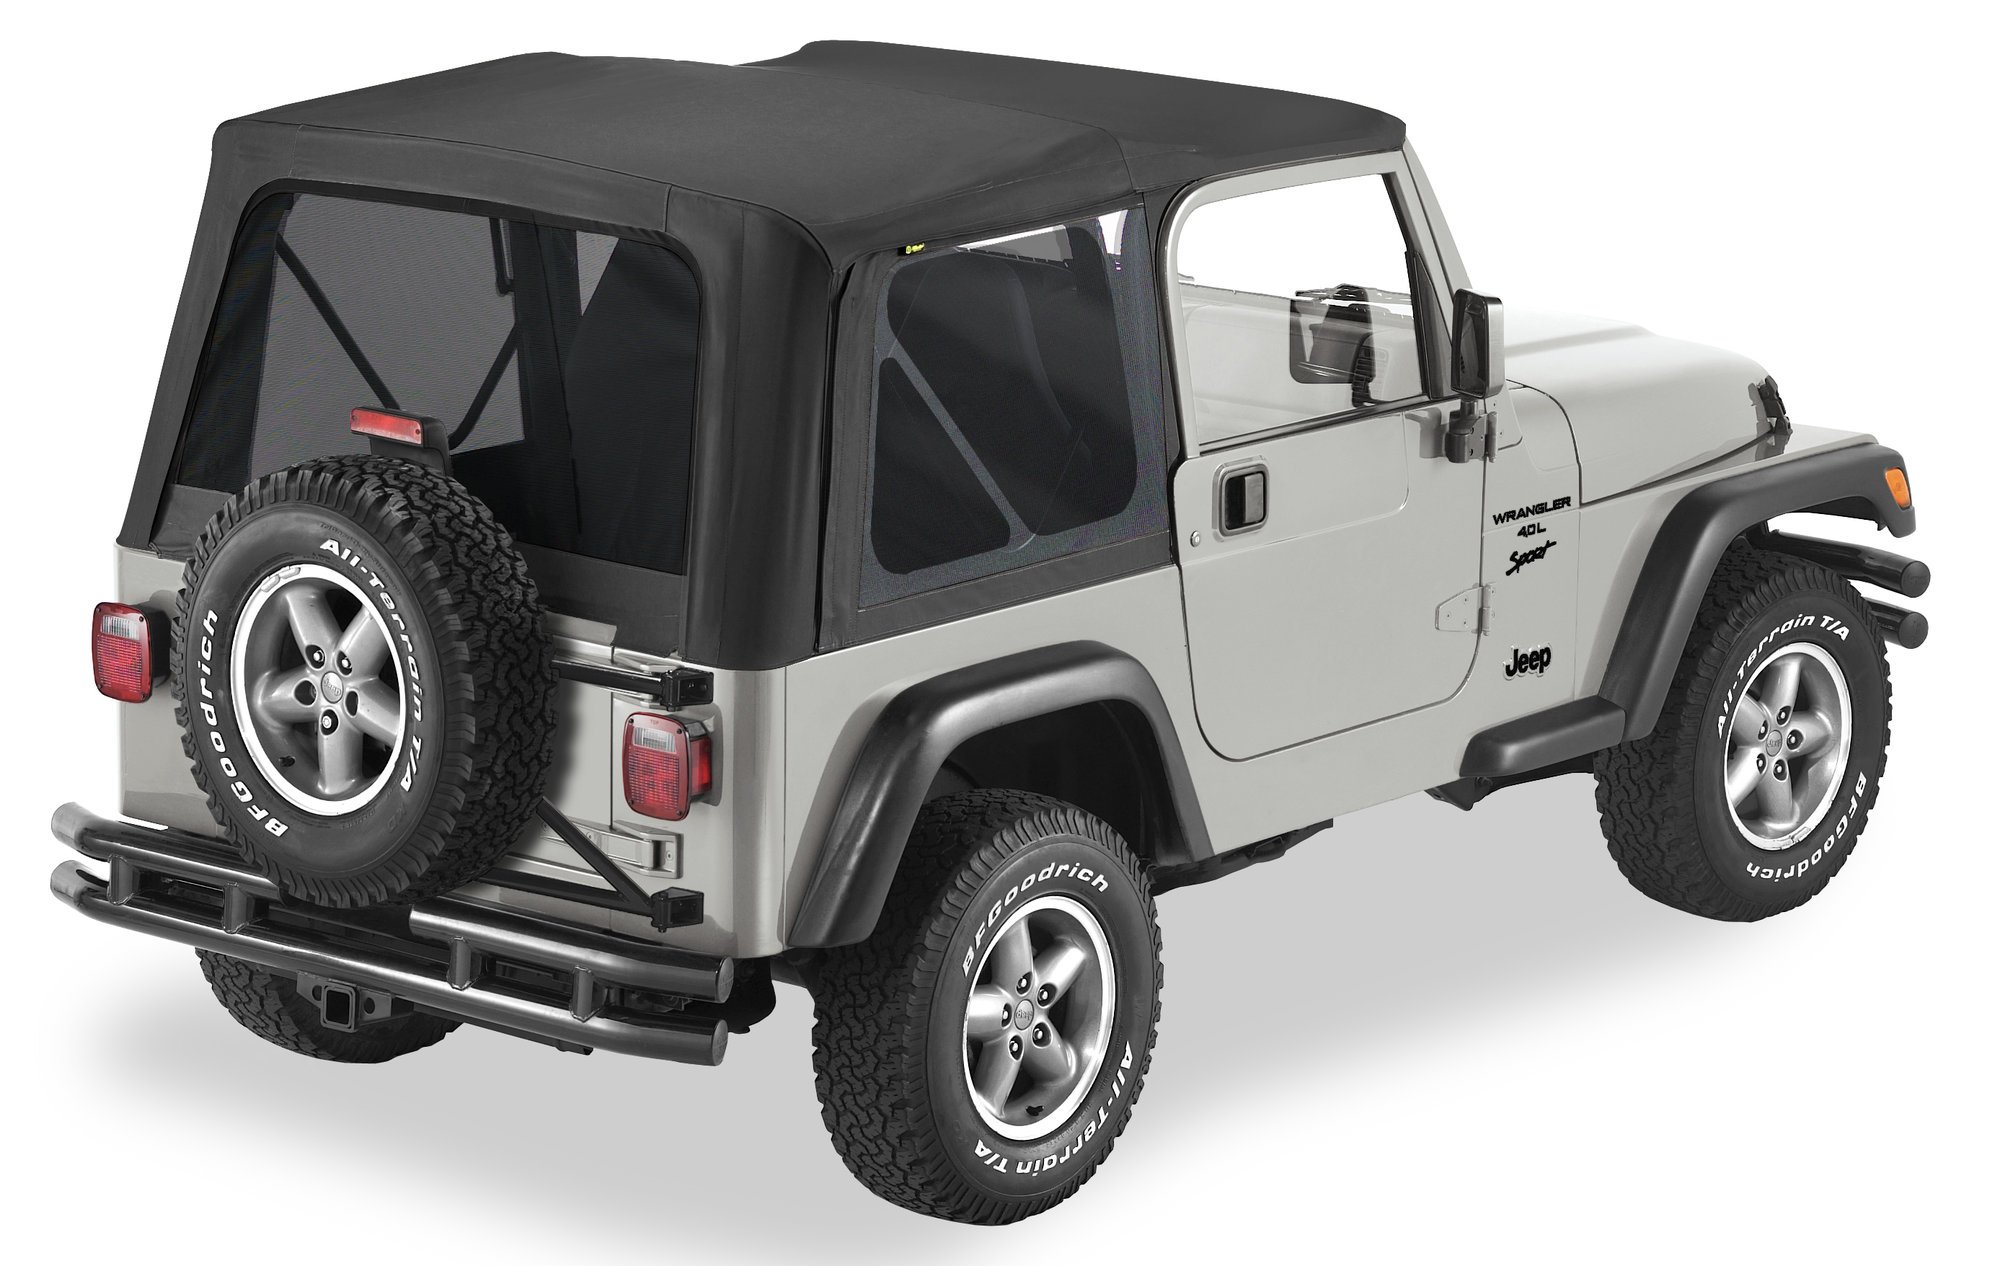 Bestop Replace-a-top with Tinted Windows for 97-06 Jeep Wrangler TJ |  Quadratec